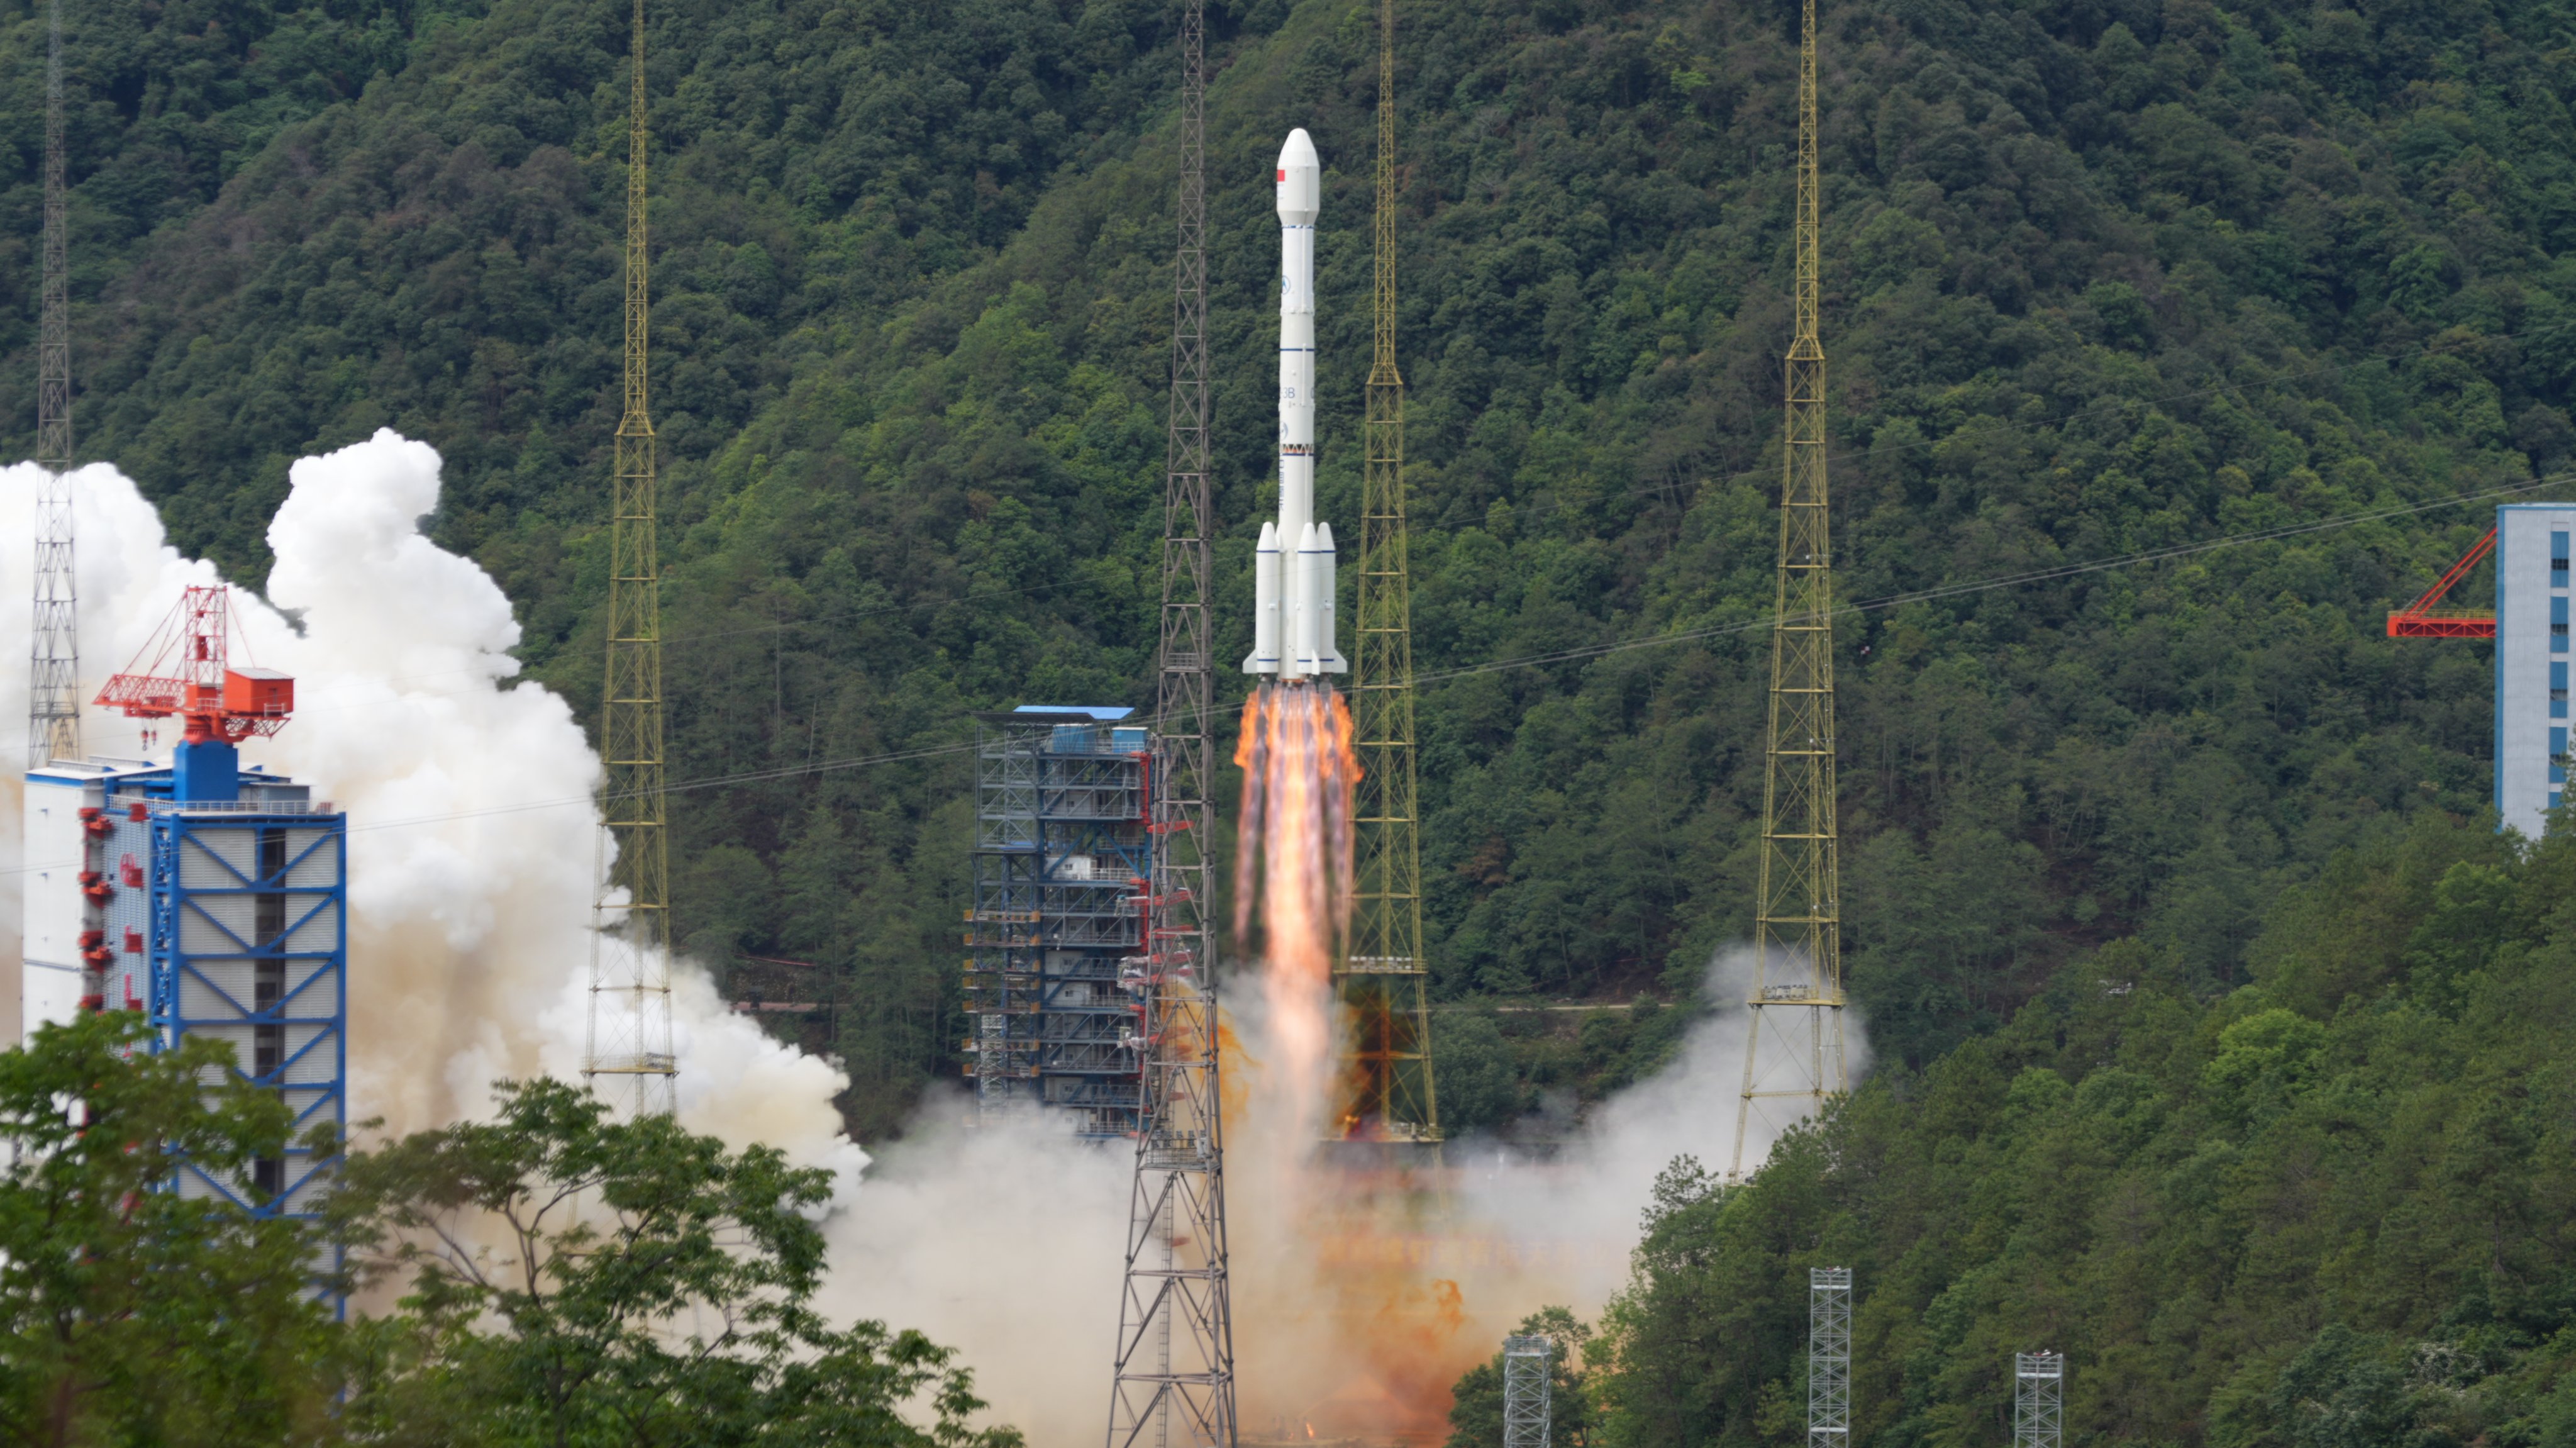 A Long March-3B rocket carrying the Smart SkyNet-1 01 satellite blasts off from the Xichang Satellite Launch Centre in Sichuan province on Thursday. Photo: Xinhua